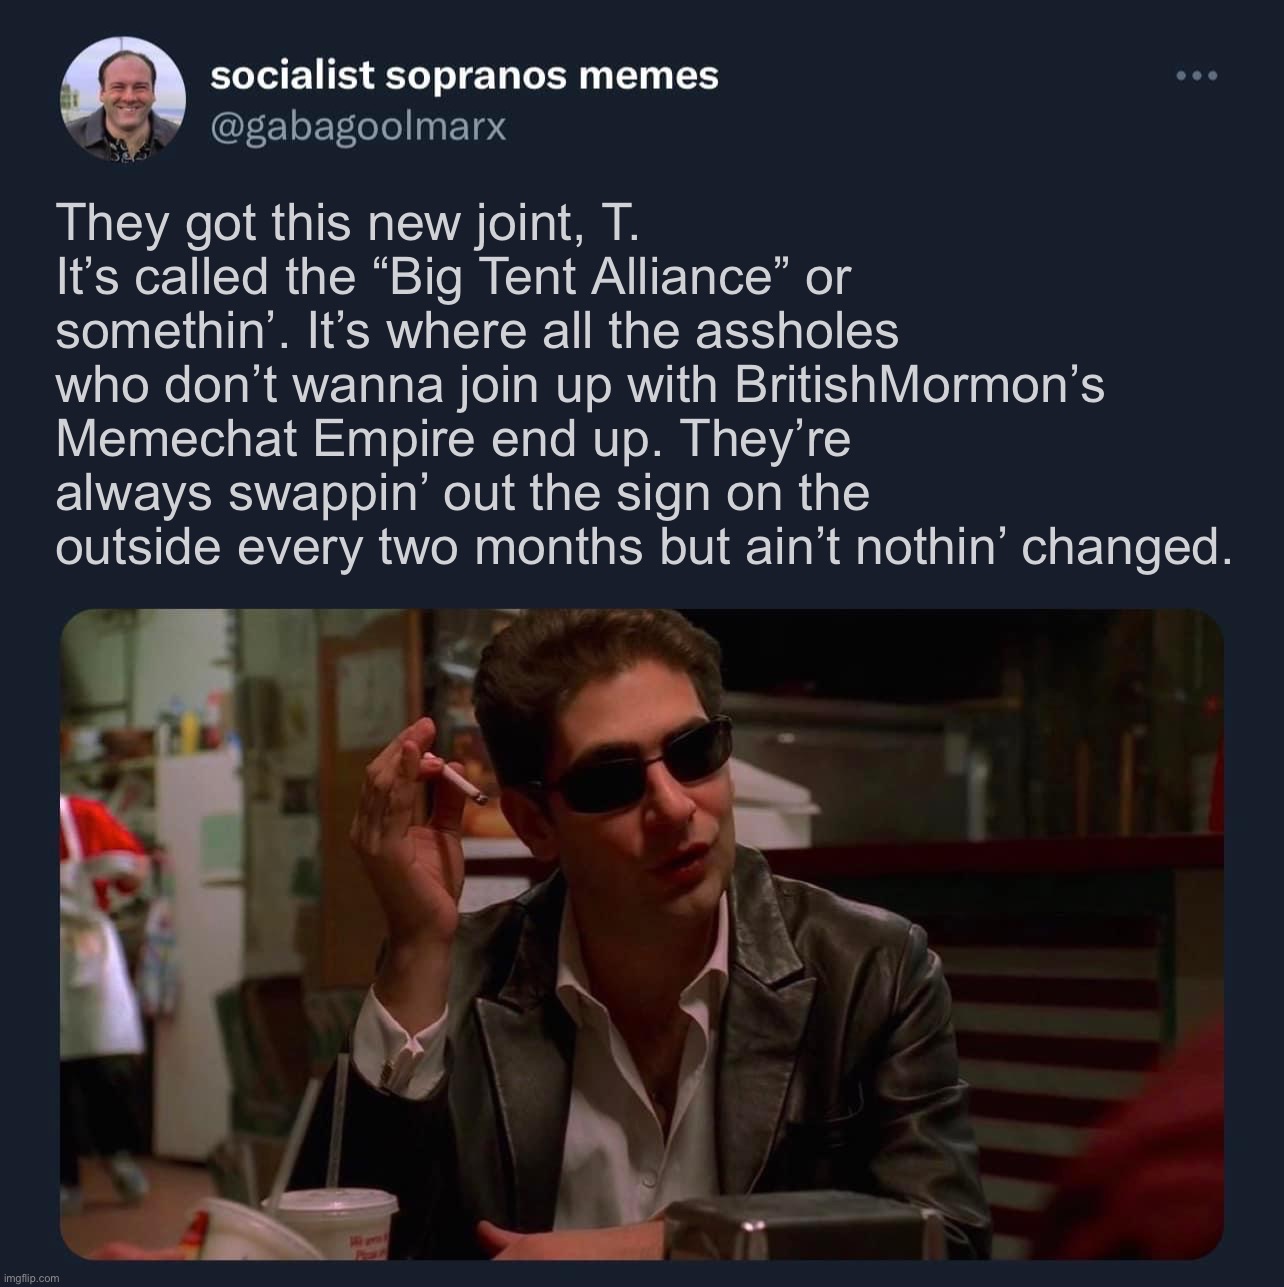 Socialist Sopranos memes template | They got this new joint, T. It’s called the “Big Tent Alliance” or somethin’. It’s where all the assholes who don’t wanna join up with BritishMormon’s Memechat Empire end up. They’re always swappin’ out the sign on the outside every two months but ain’t nothin’ changed. | image tagged in socialist sopranos memes template | made w/ Imgflip meme maker